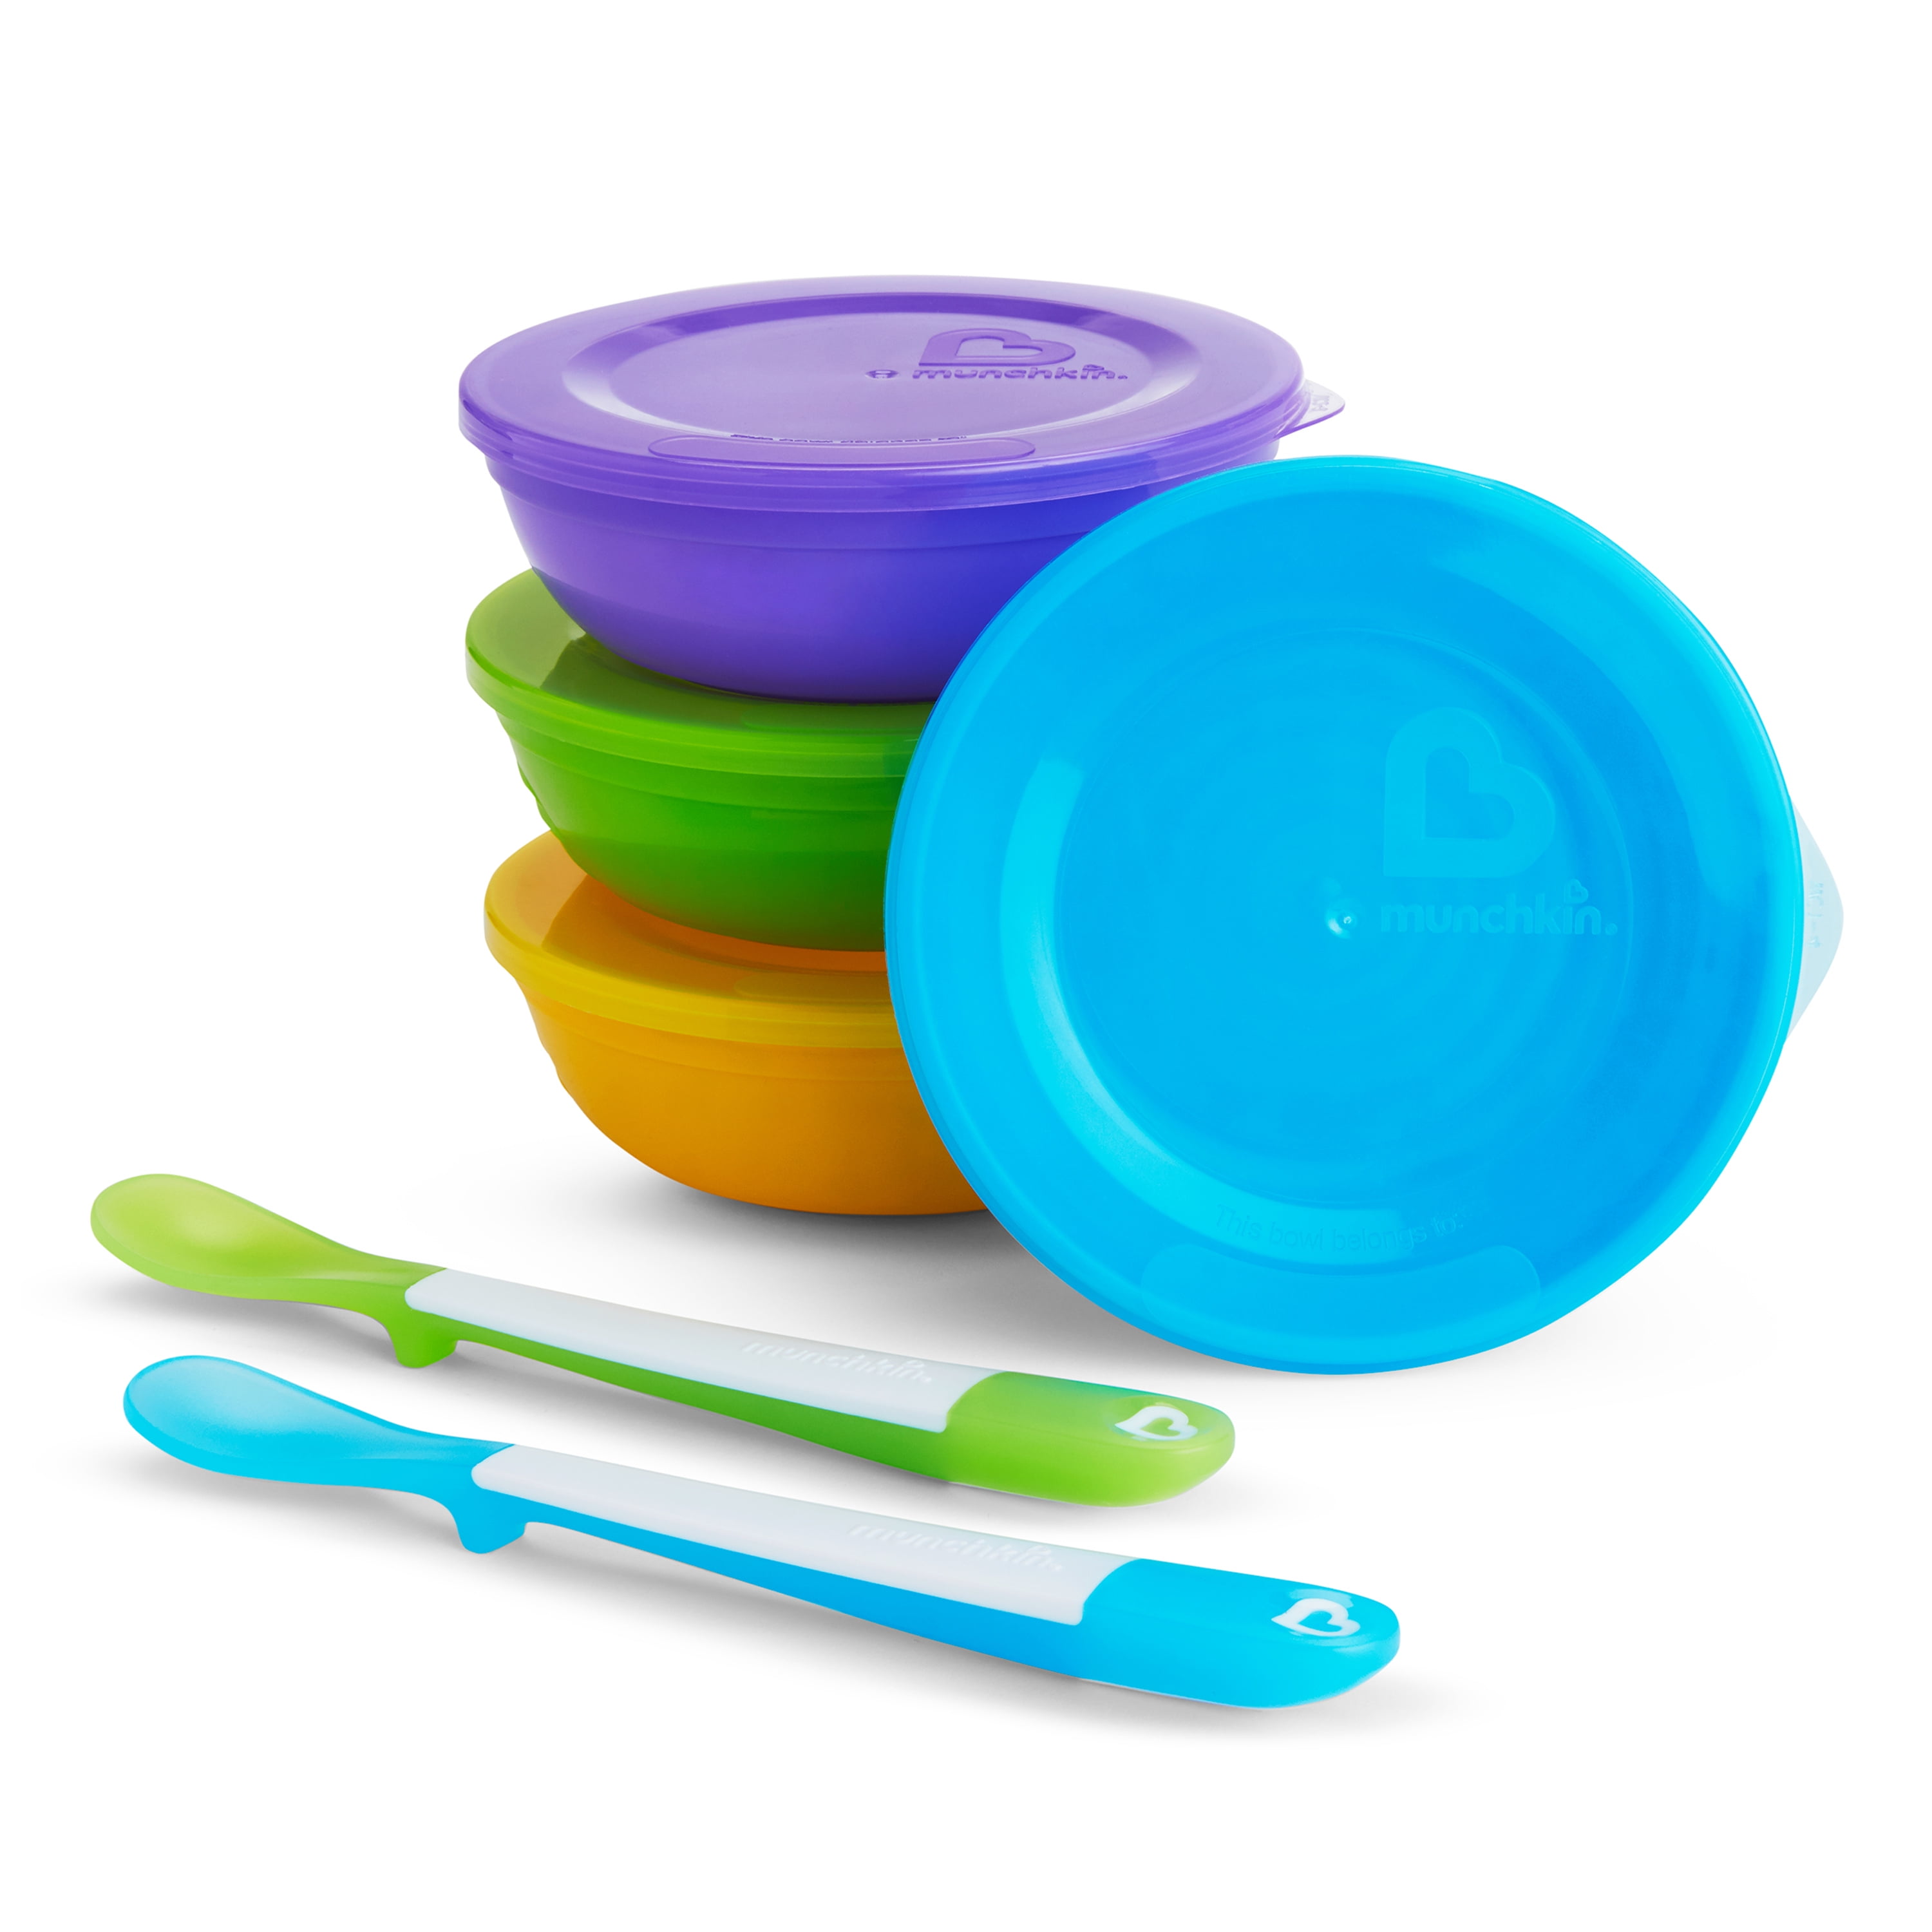 Munchkin Love-A-Bowls Toddler Feeding Set, Multi-Color, 10 Pack